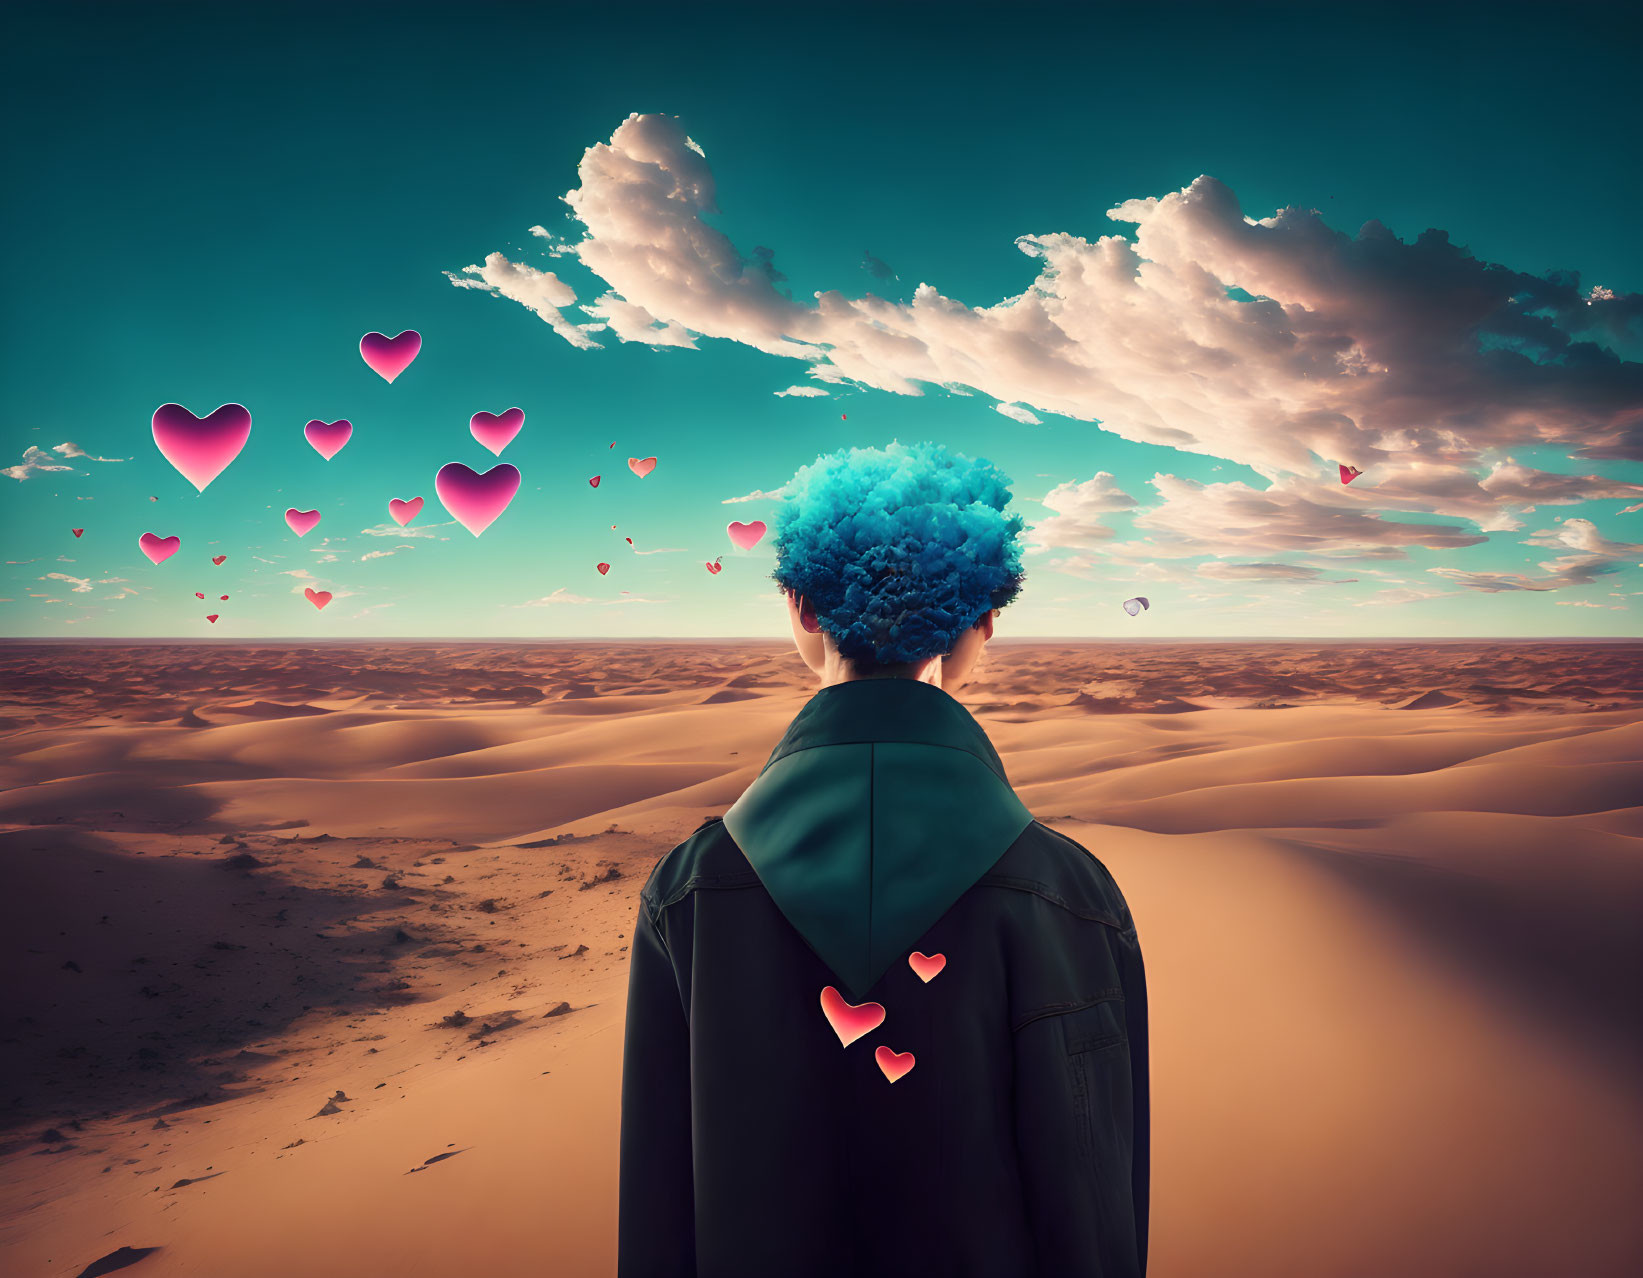 Blue Afro Person in Desert with Heart-Shaped Clouds at Sunset